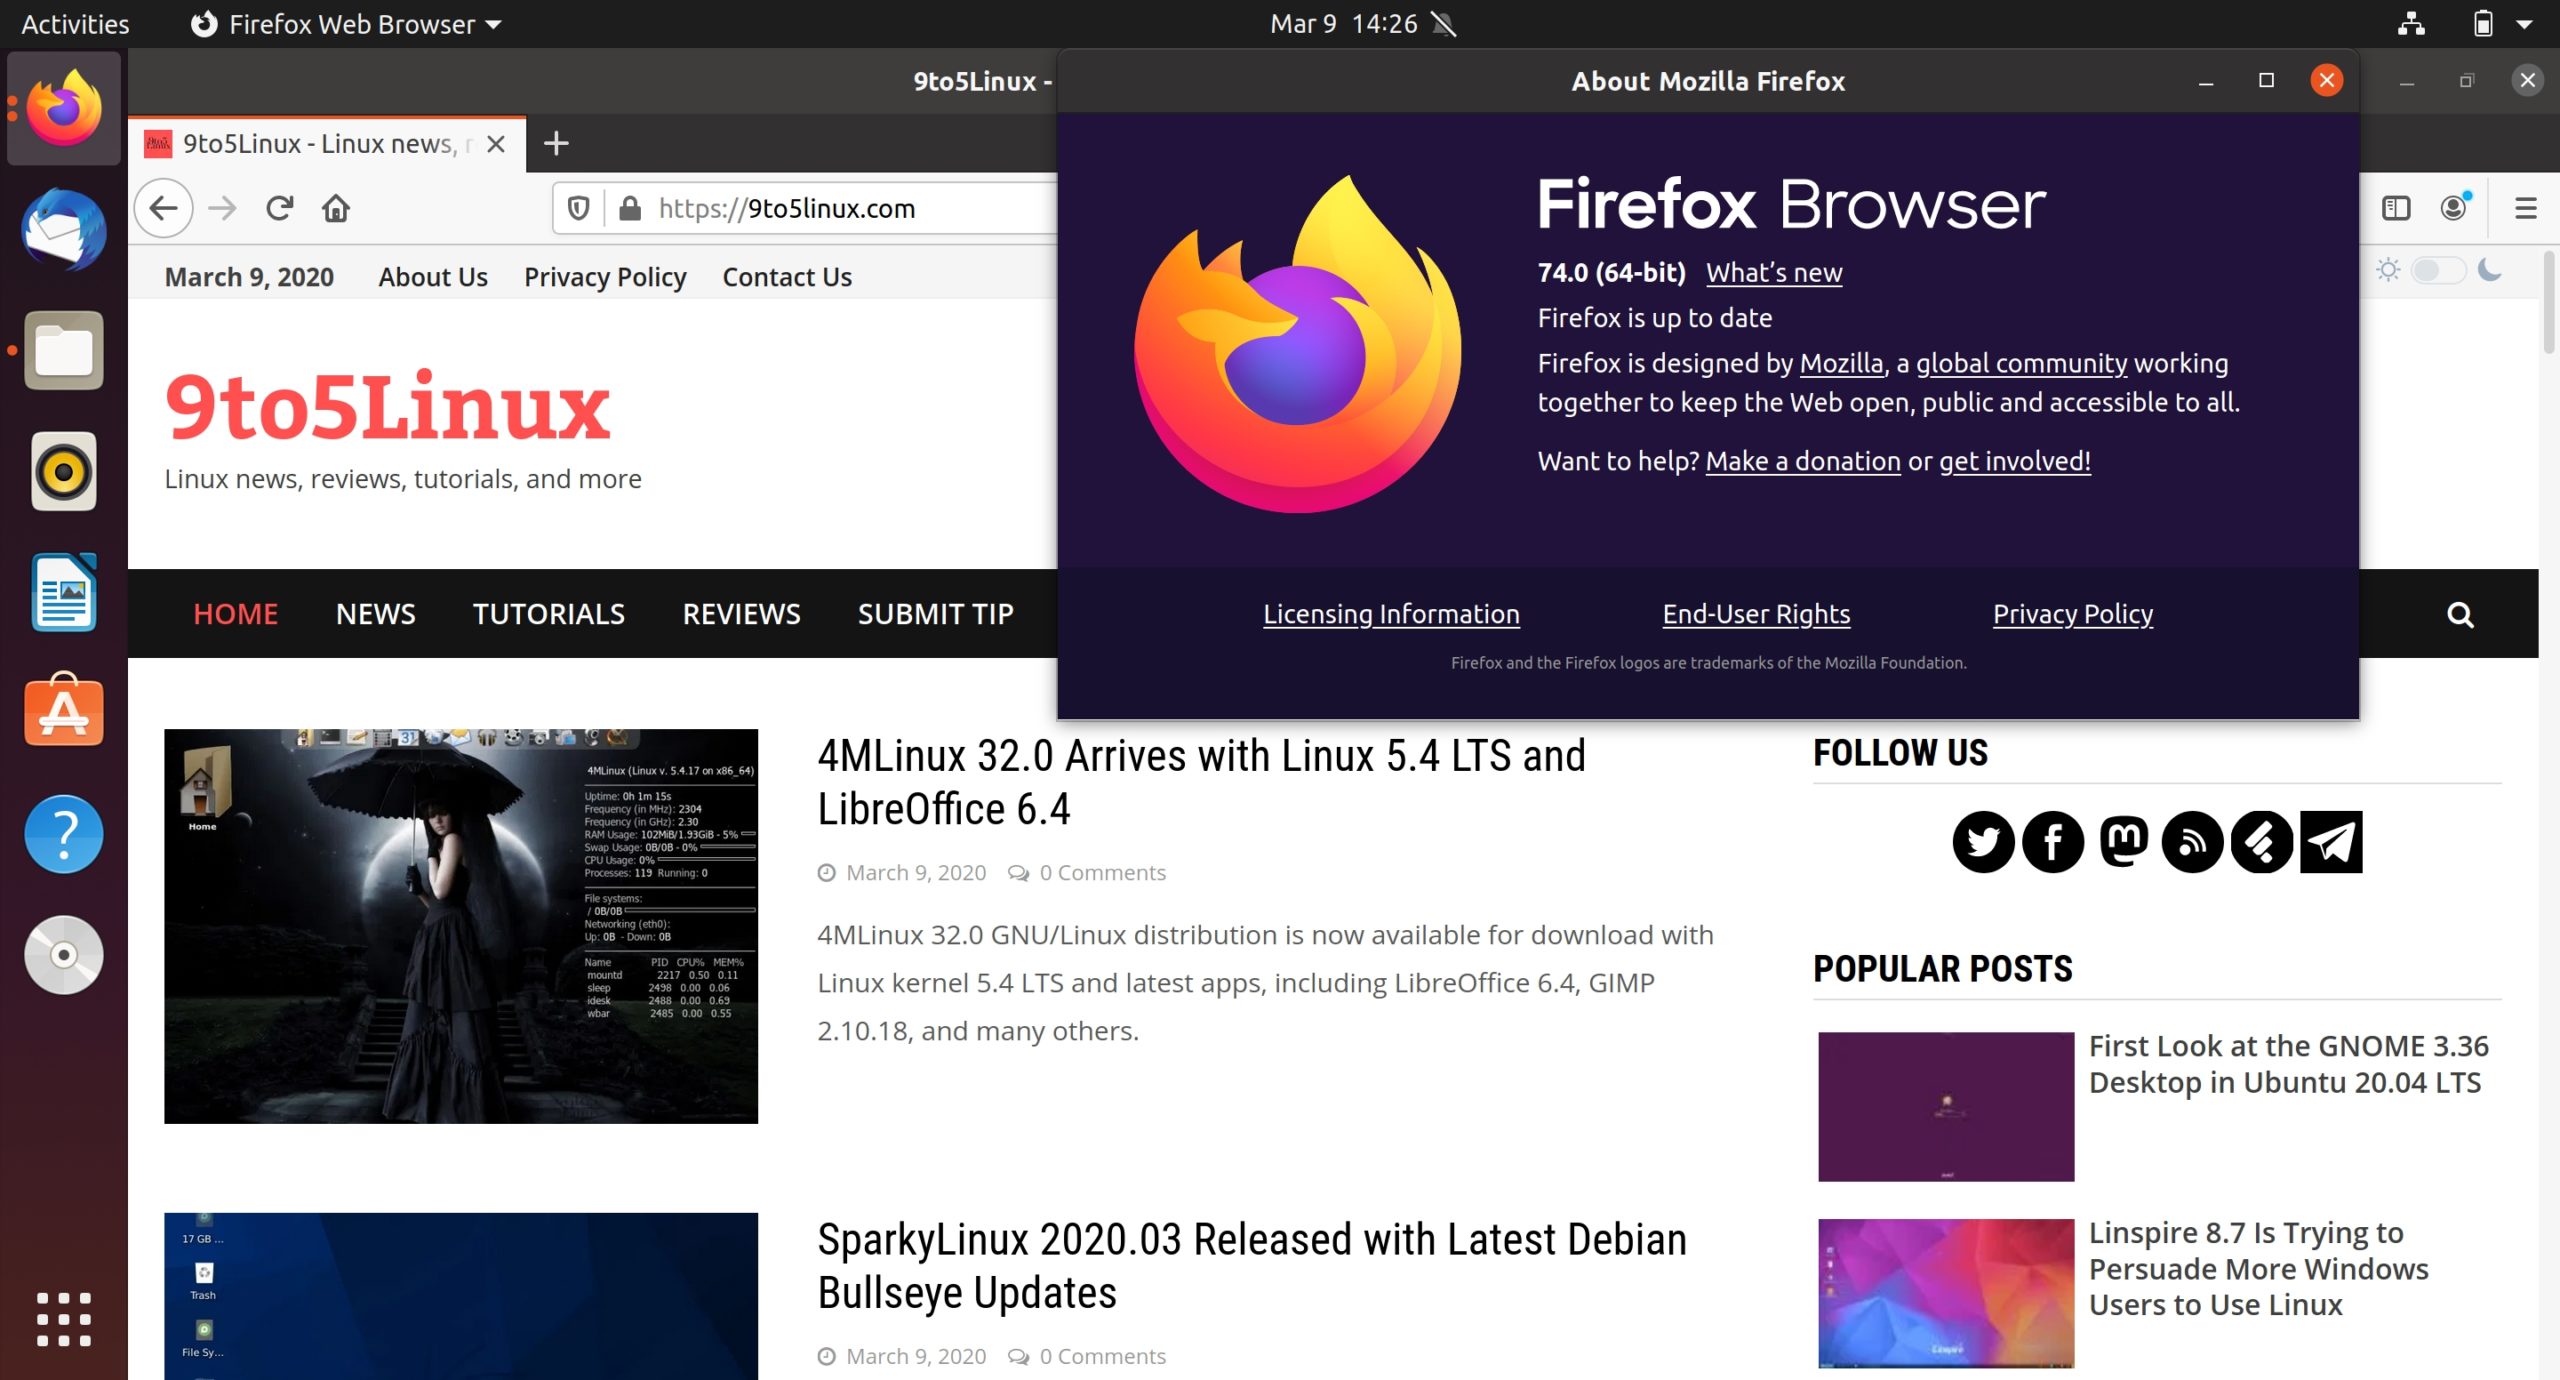 Firefox 74 Is Now Available for All Supported Ubuntu Releases